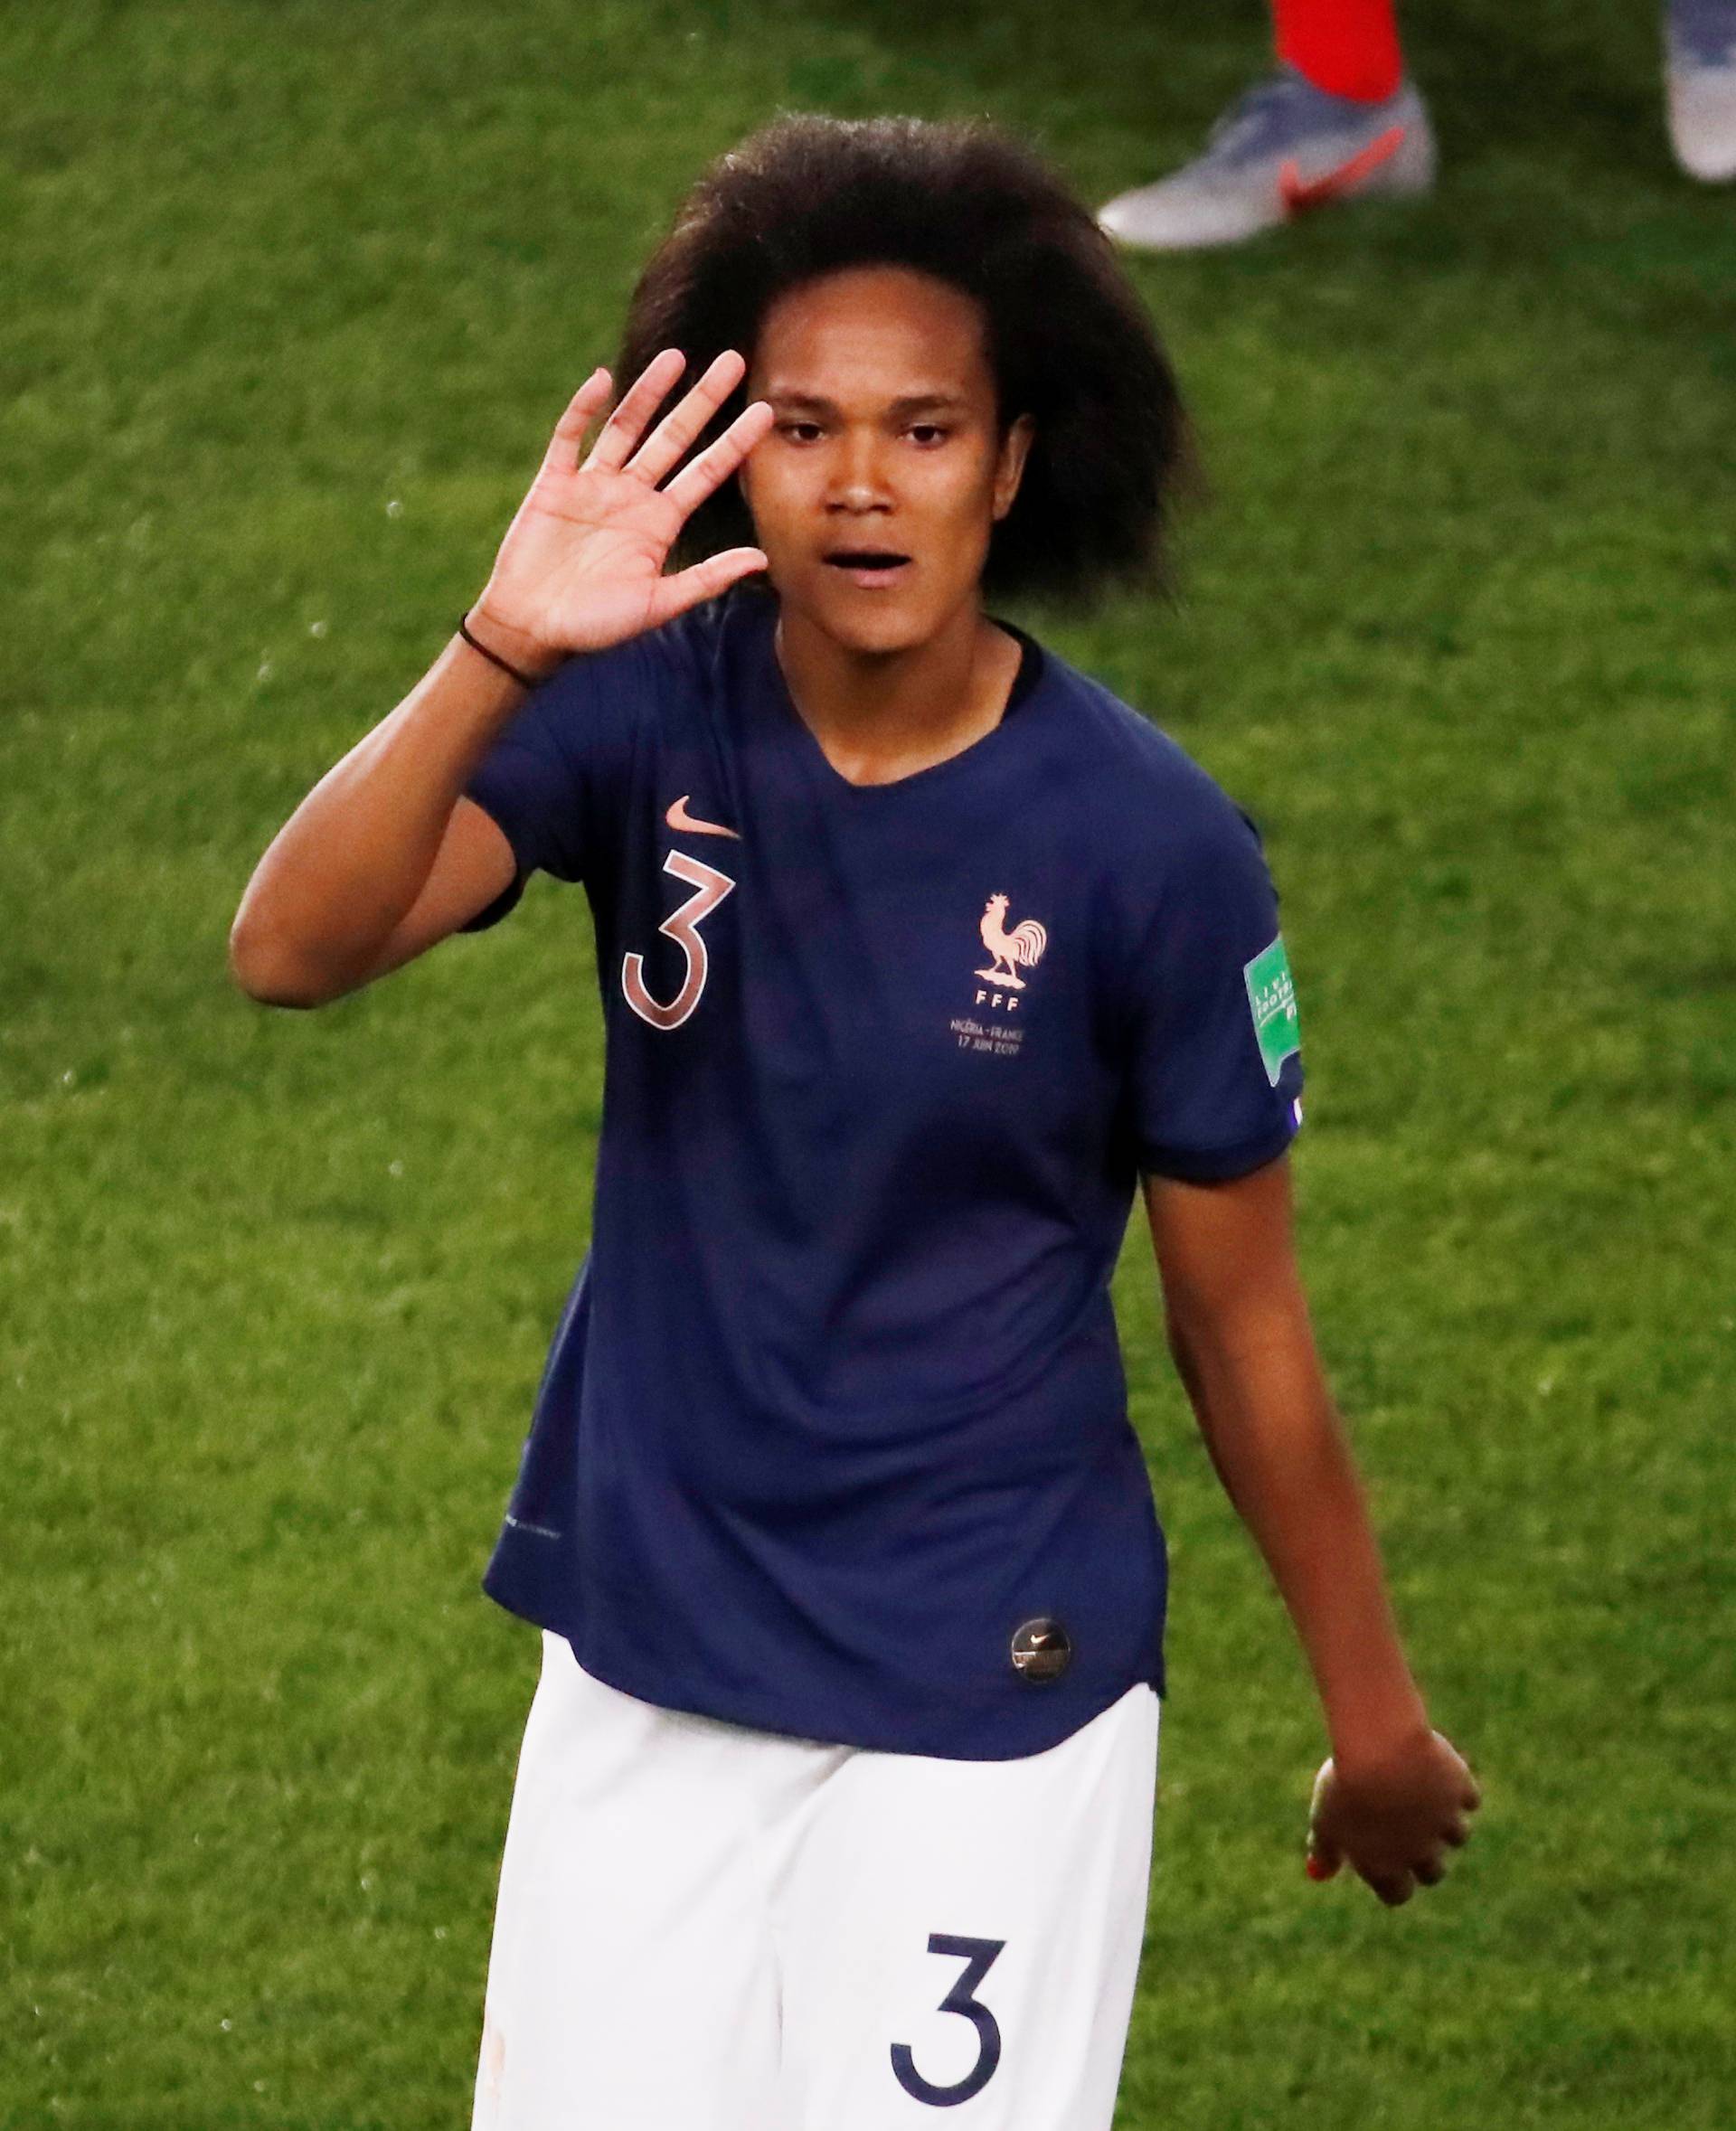 Women's World Cup - Group A - Nigeria v France